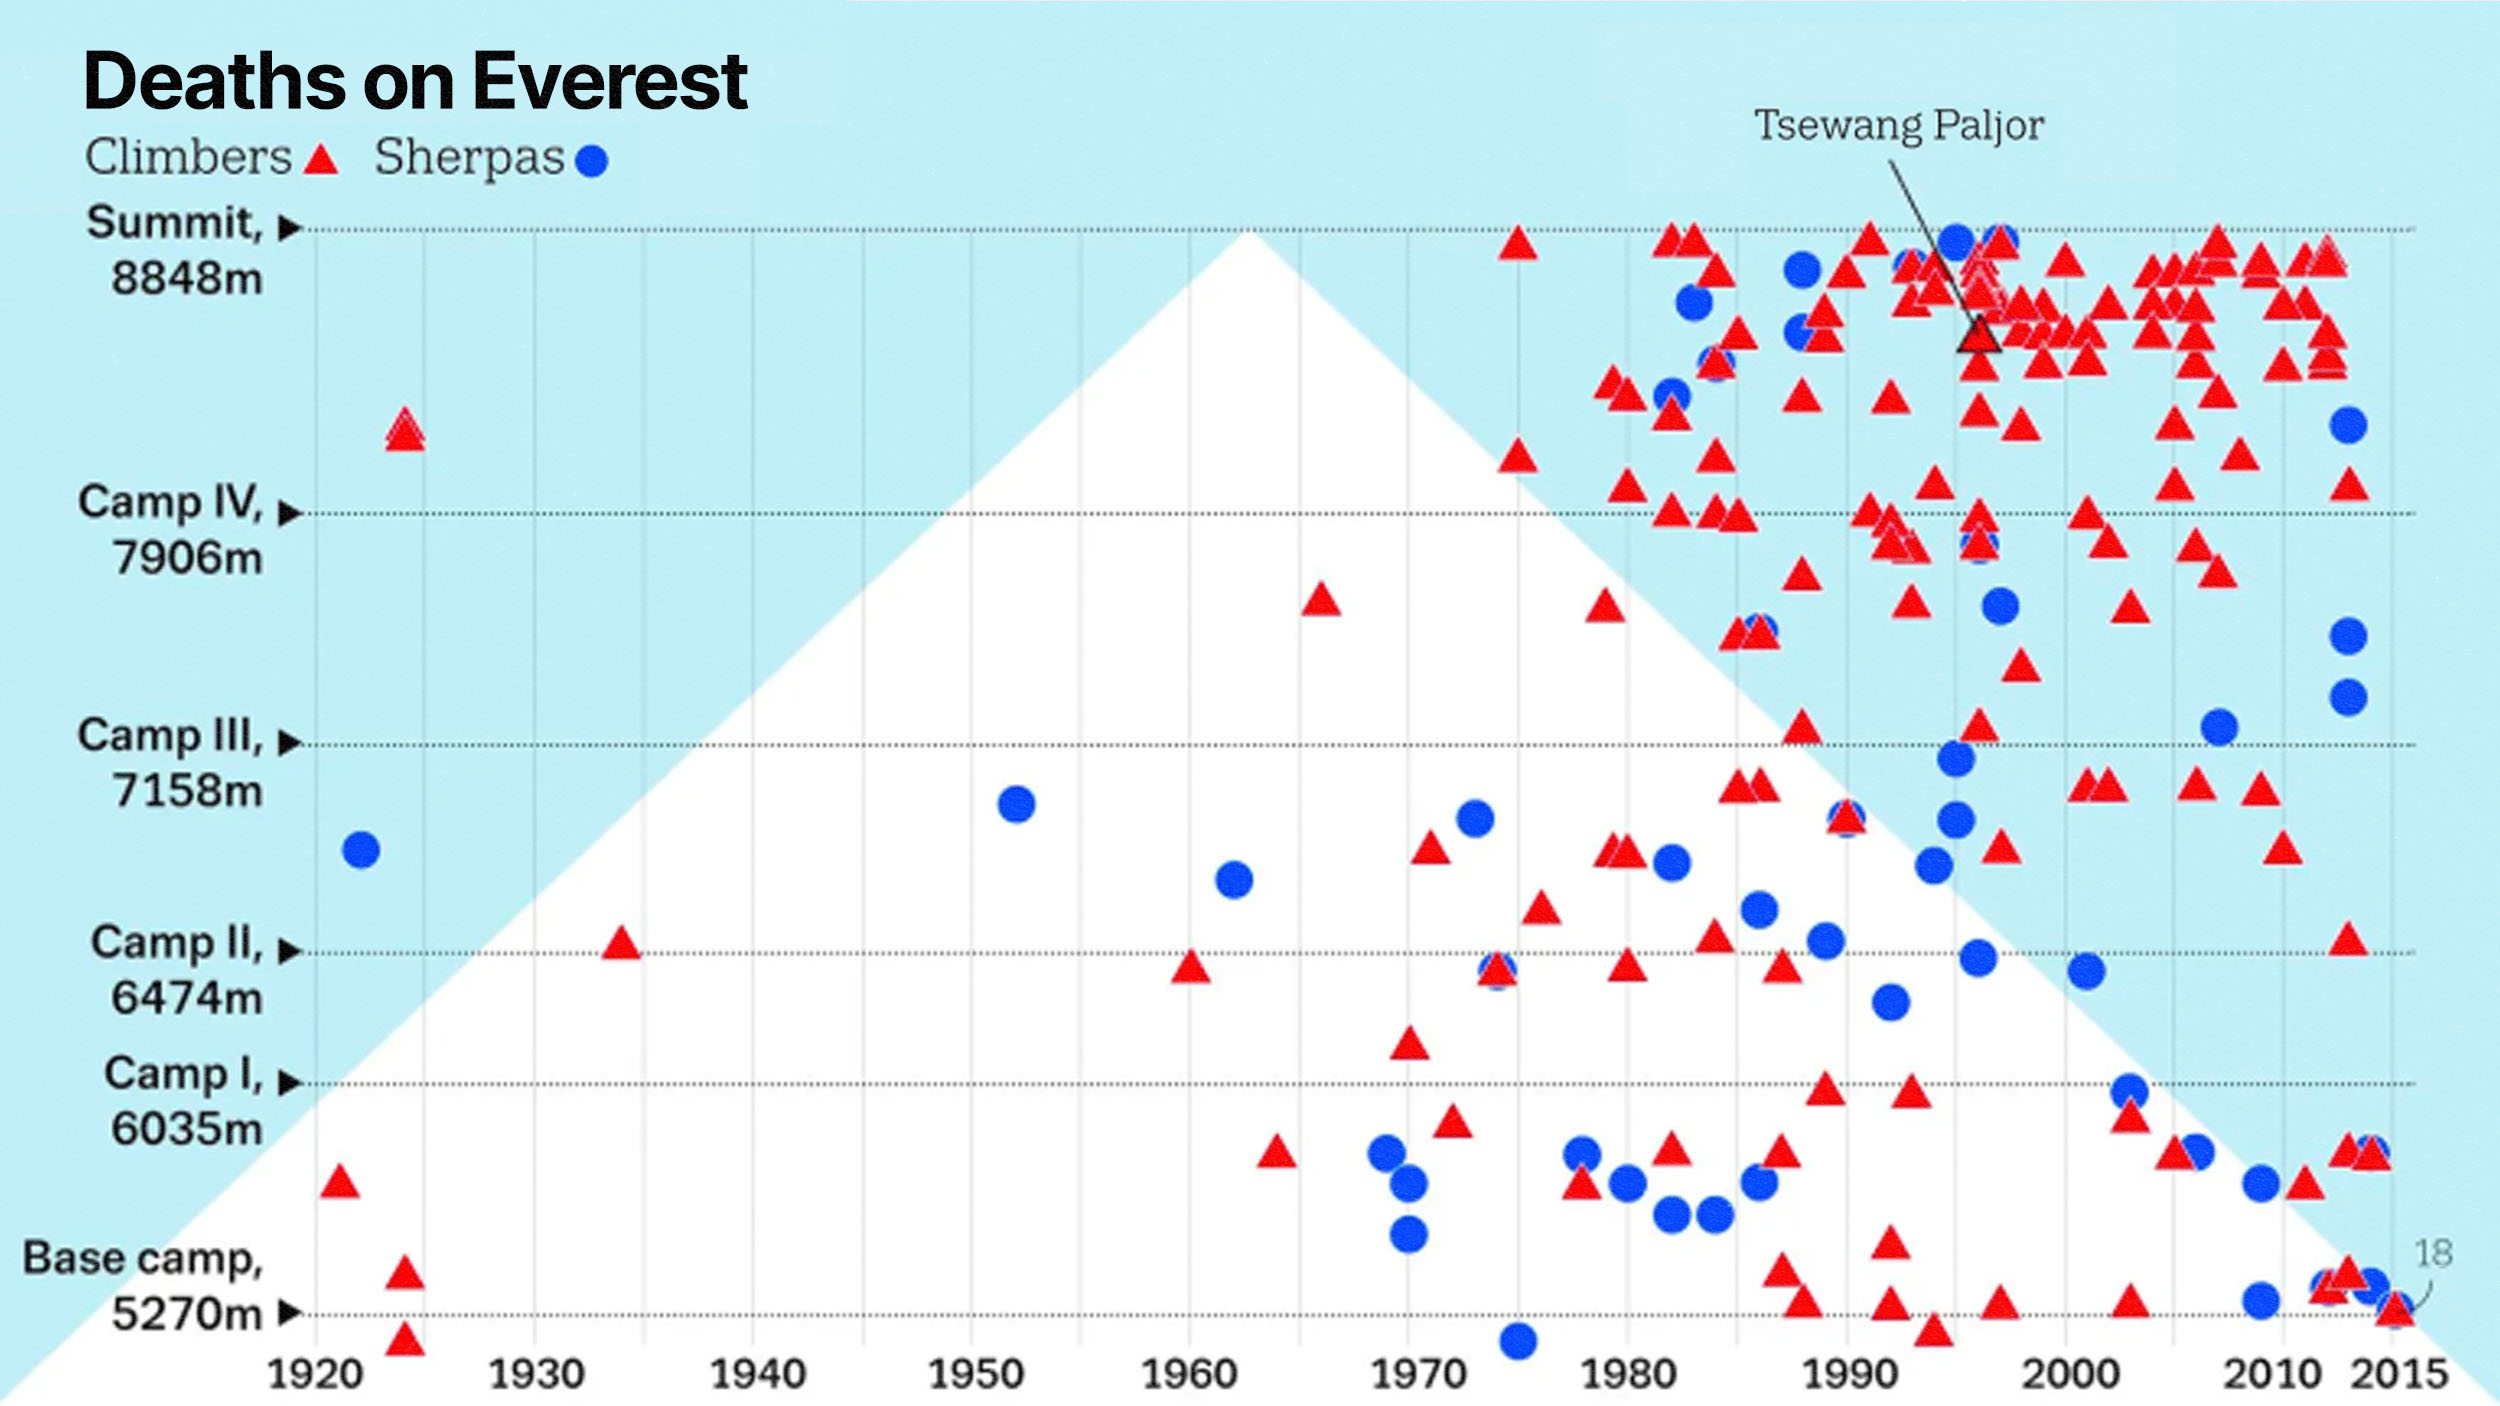 A graph showing the death rate on everest.